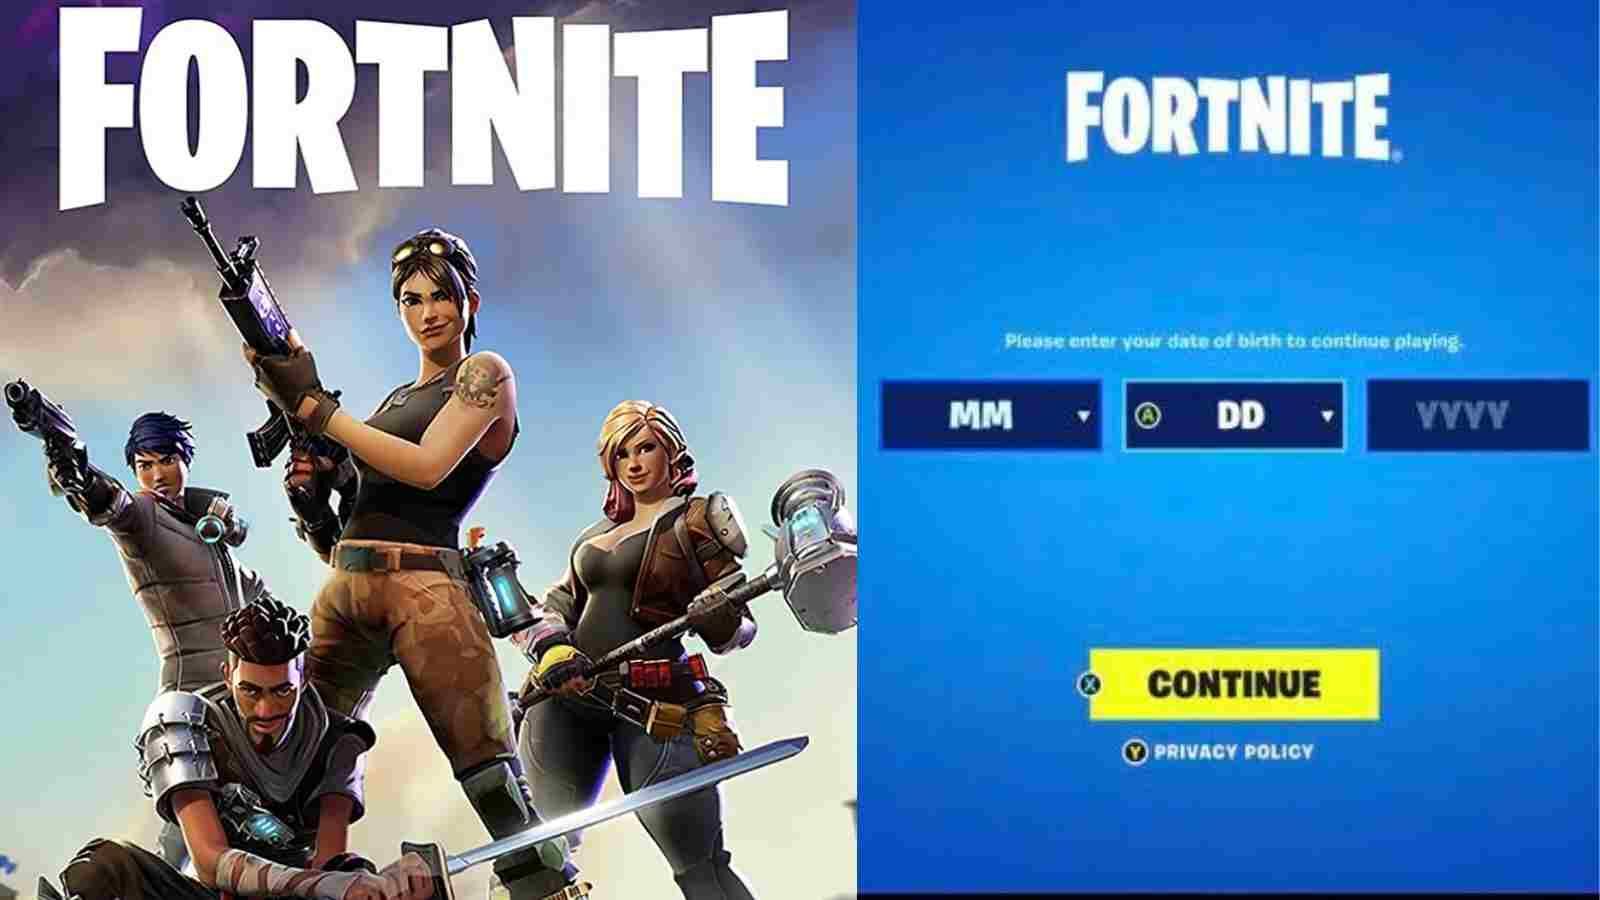 Why Fortnite is asking for date of birth and what is minimum age to play it?